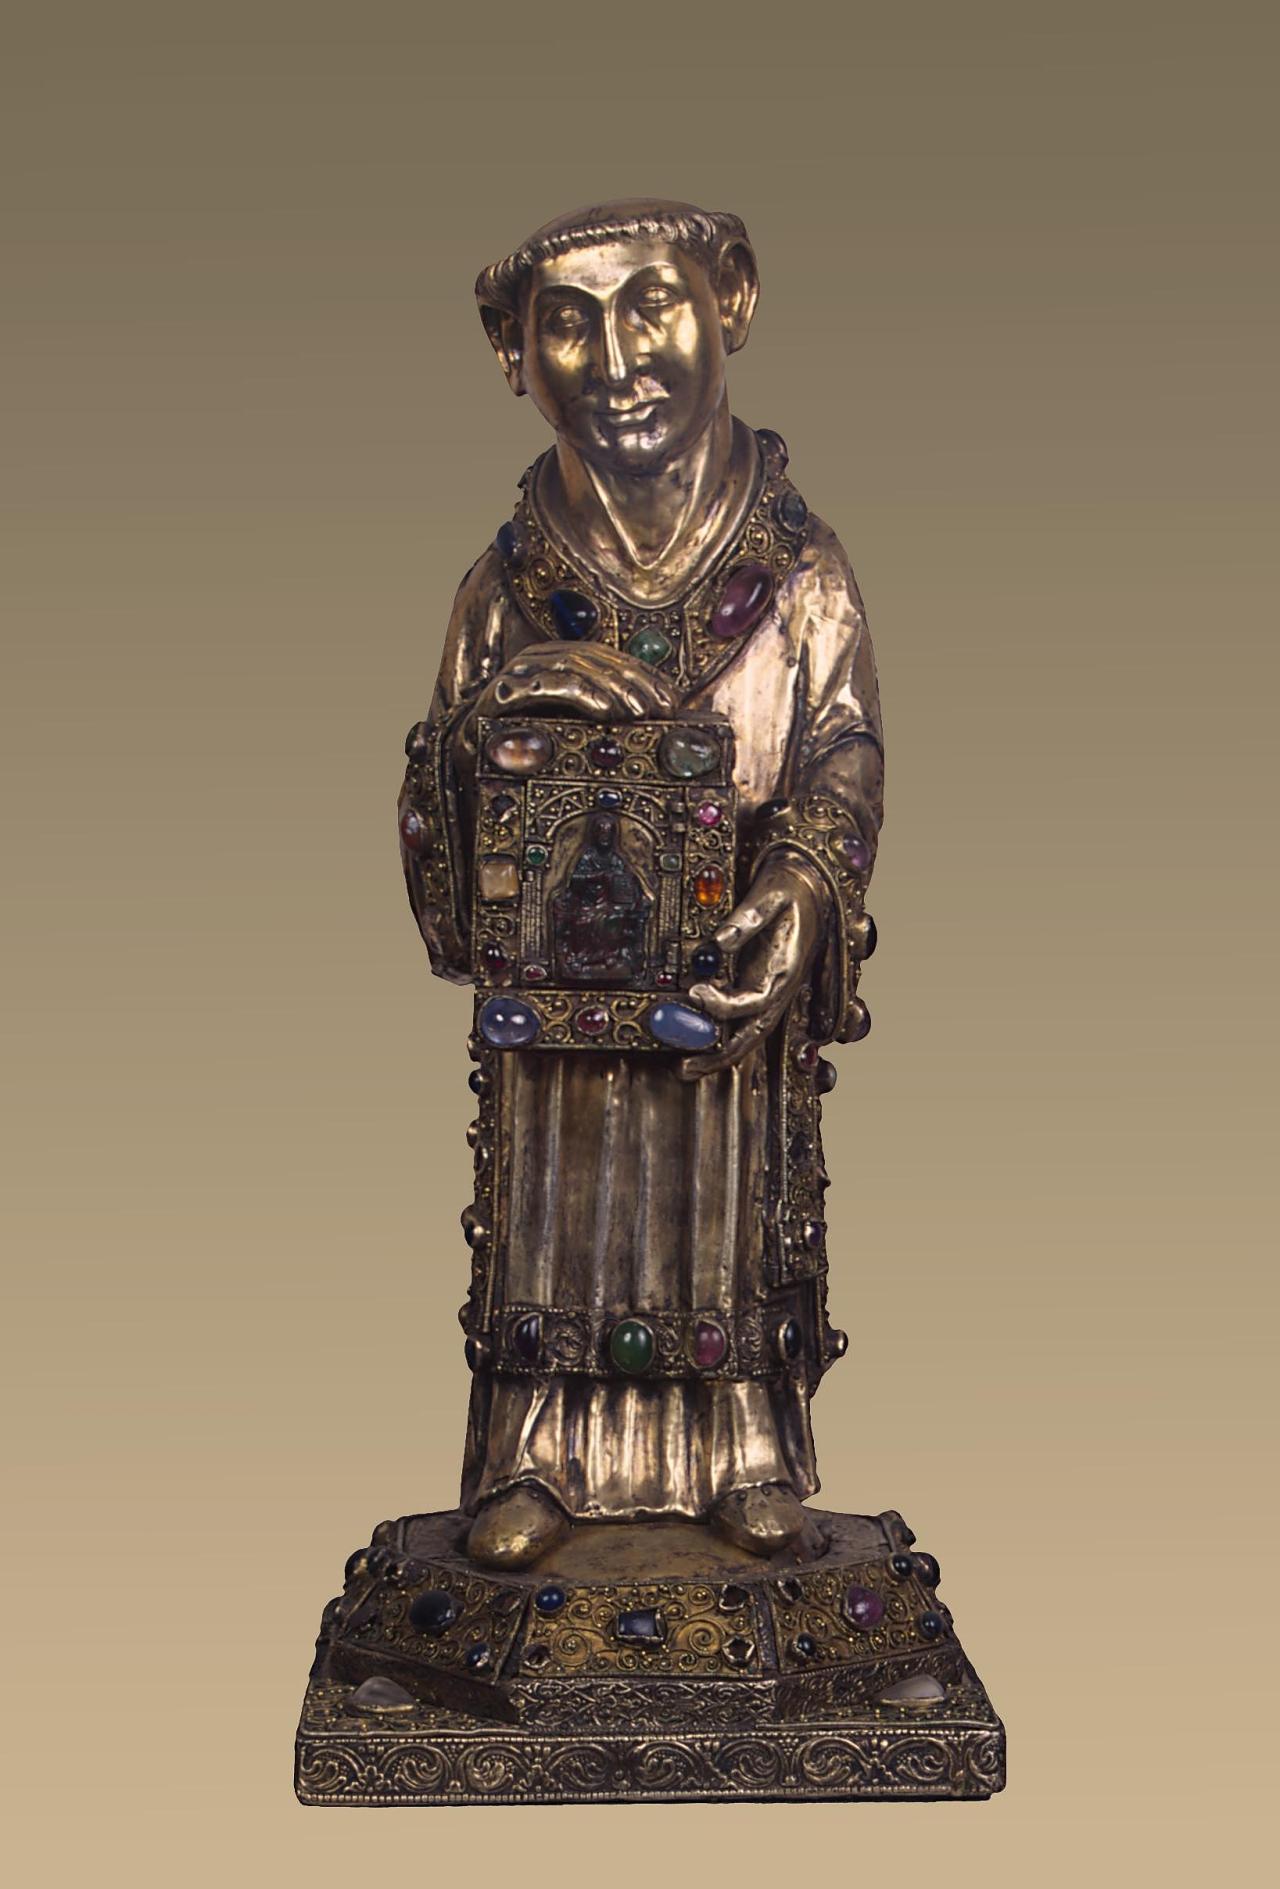 kutxx:
“2.
Reliquary figure (Romanesque period)
12th century, silver gilt and gems on wood core, The State Hermitage Museum, Saint Petersburg
”